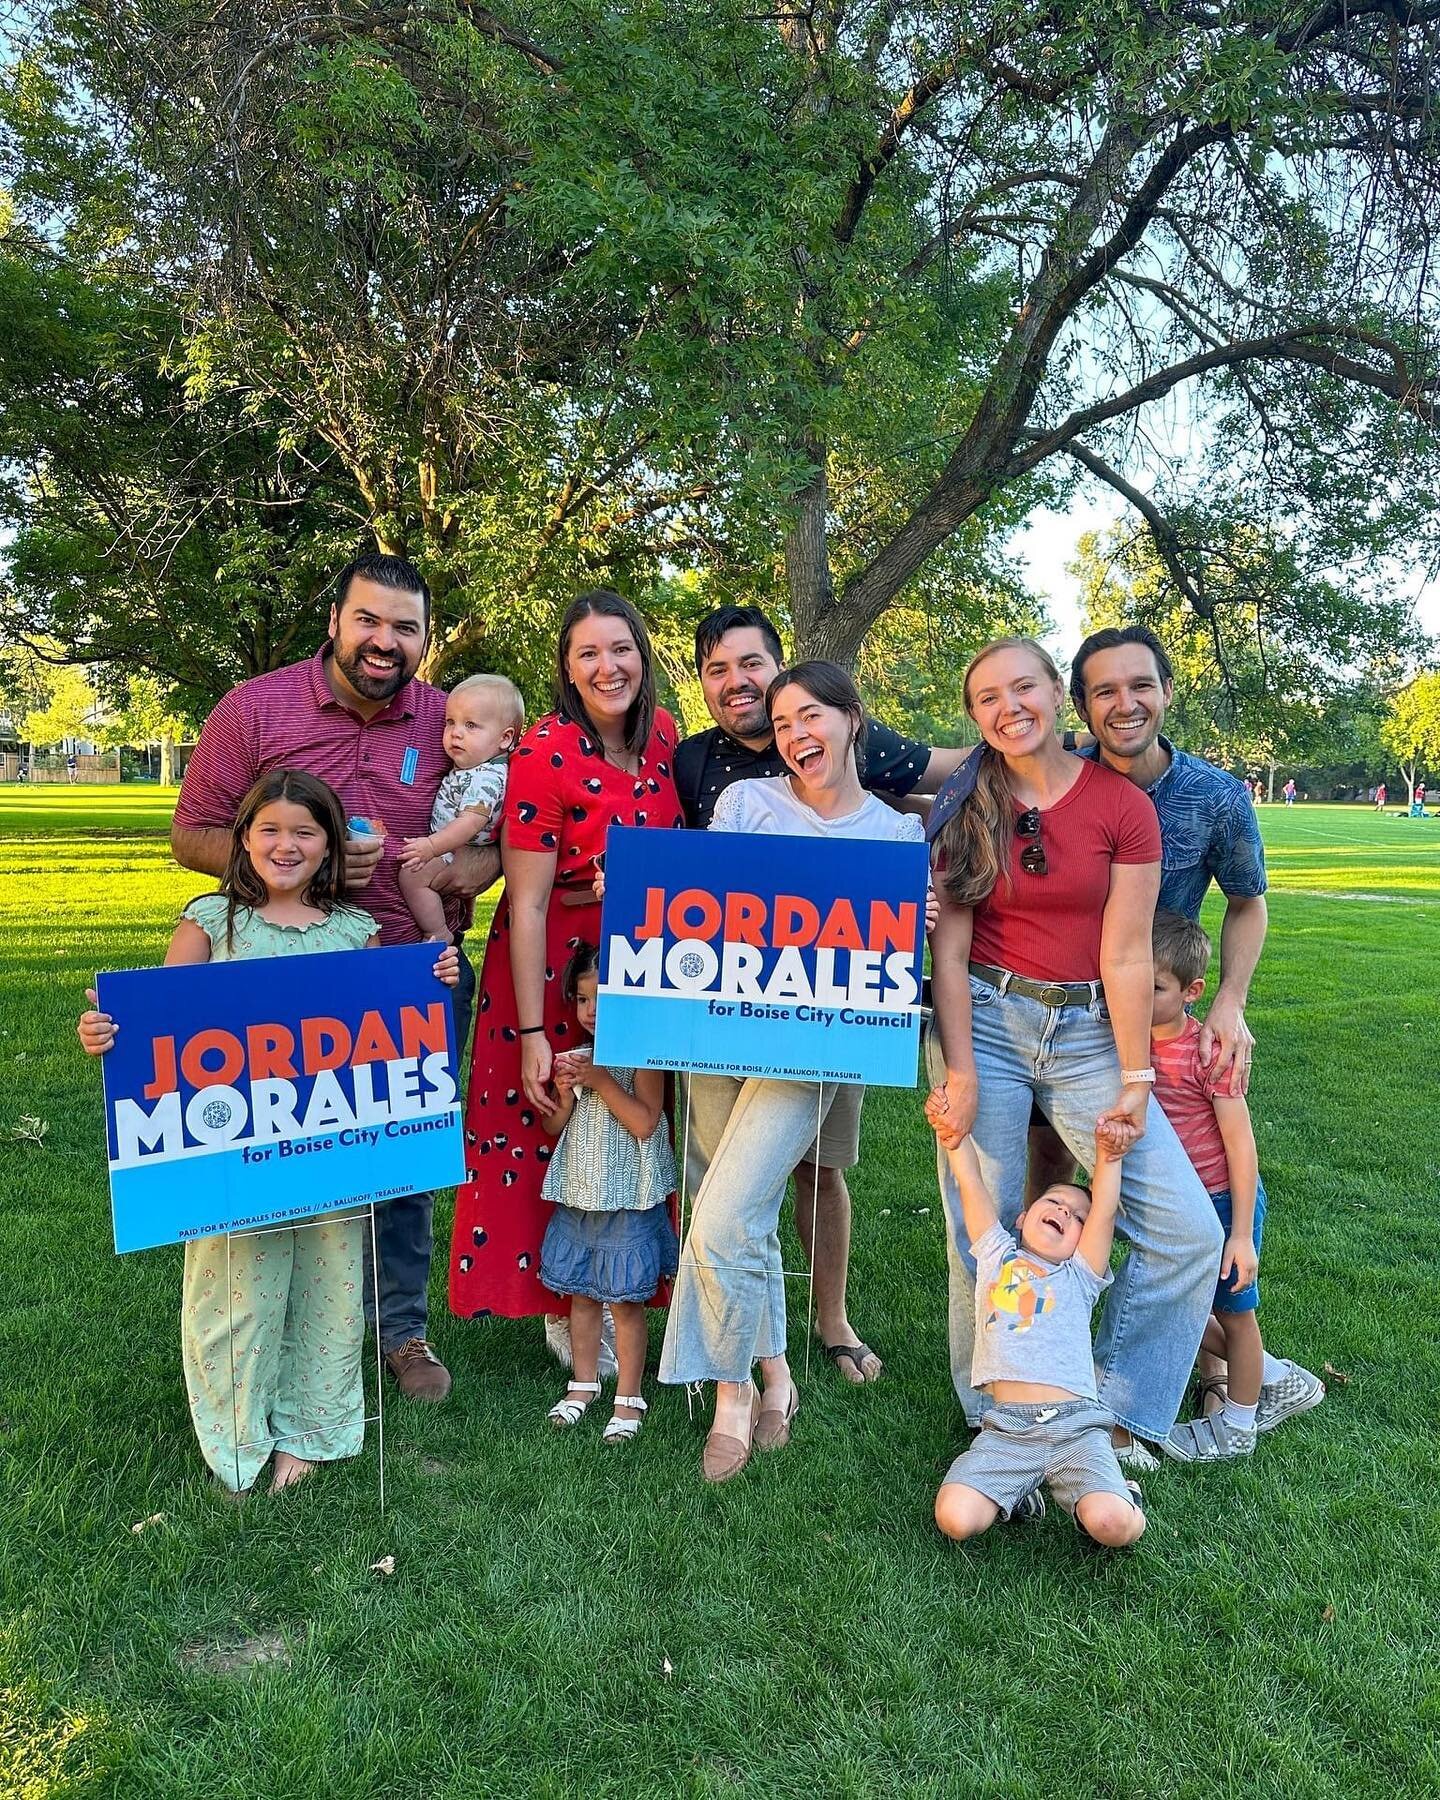 Our crew of volunteers are making their way around, picking up signs. You can help by dropping your Jordan Morales yard sign (or any Jordan Morales sign you see on the side of the road) off at 1348 S. Vista Ave.

Thank you!